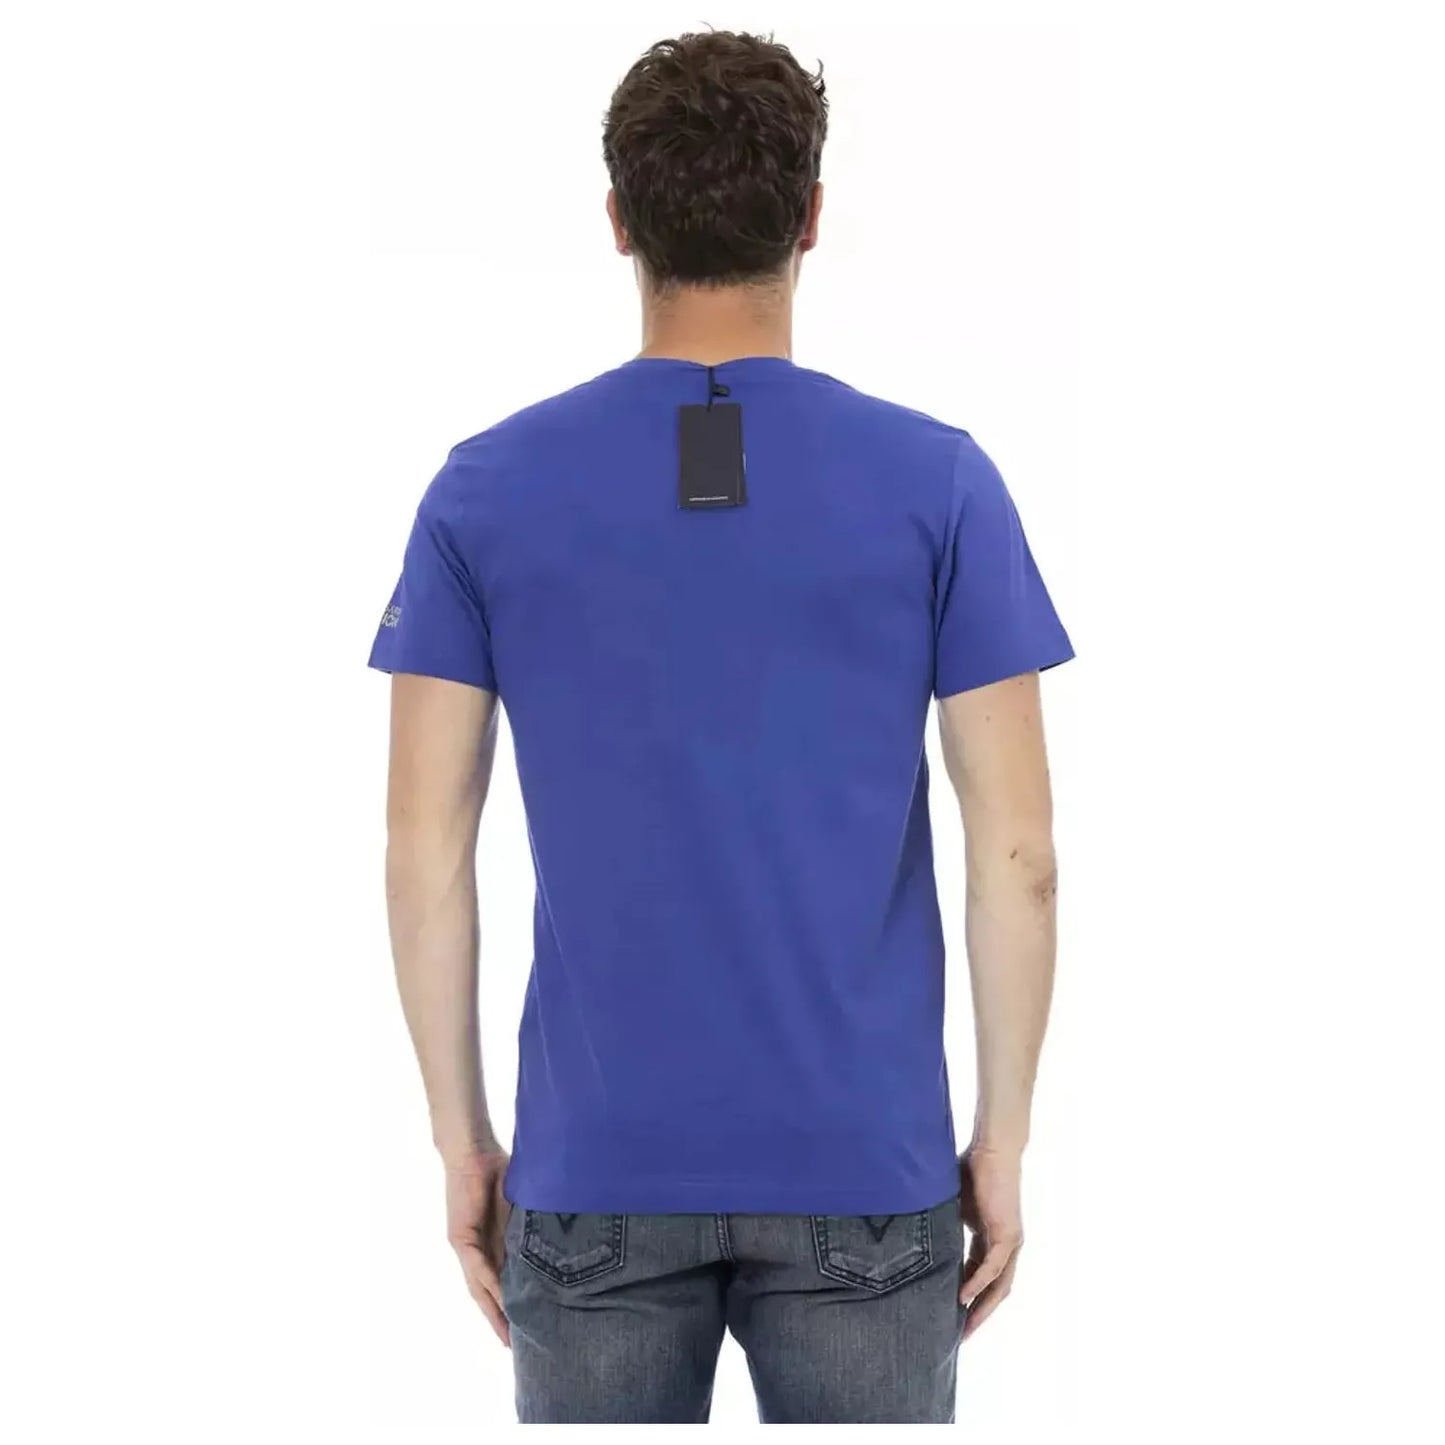 Trussardi Action Elegant V-Neck Tee with Chic Front Print blue-cotton-t-shirt-17